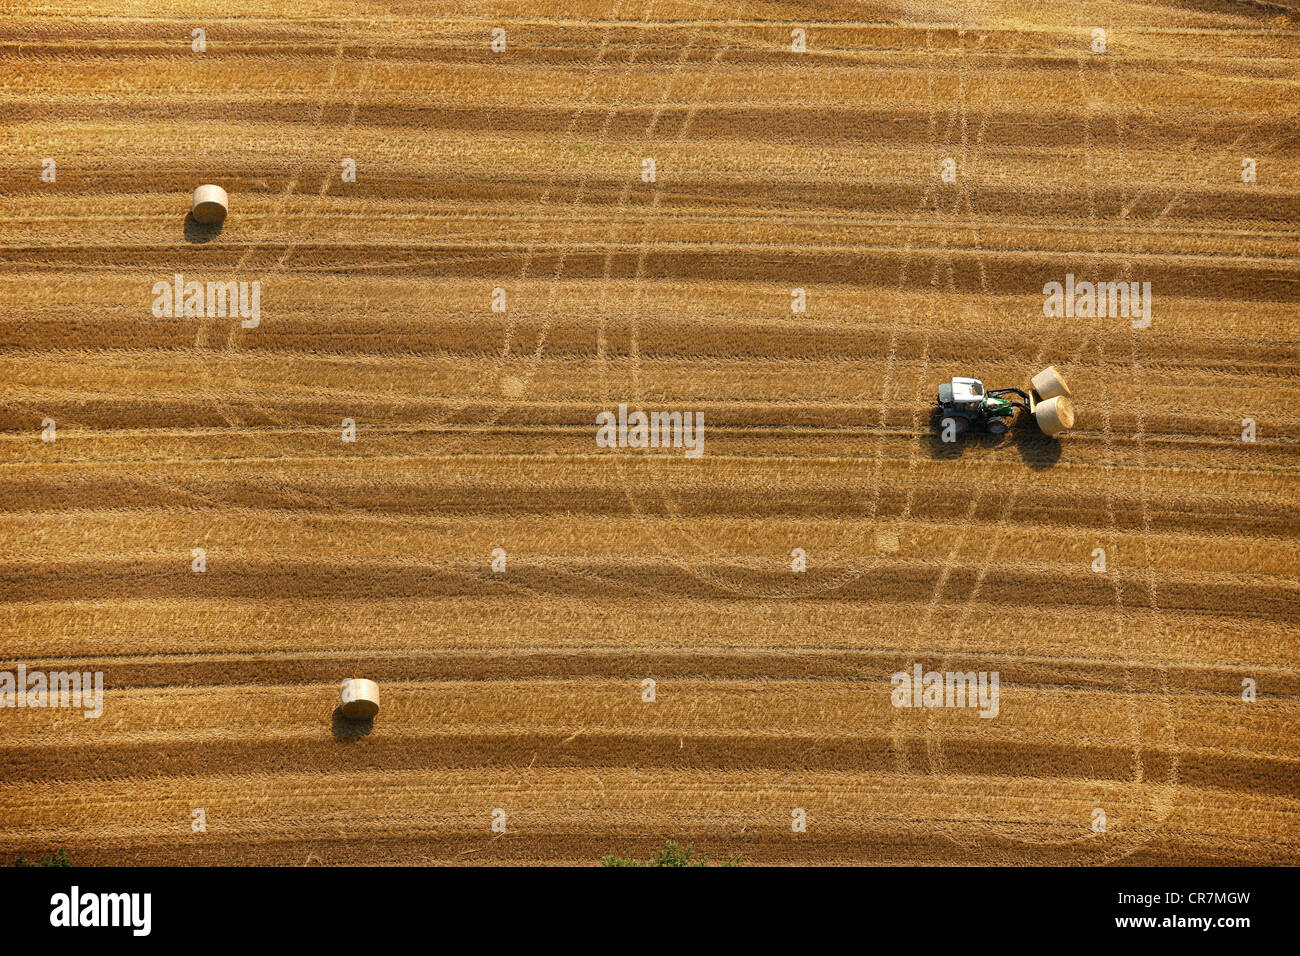 Aerial view, harvesting, straw bales and a tractor, Hamm, Ruhr area, North Rhine-Westphalia, Germany, Europe Stock Photo